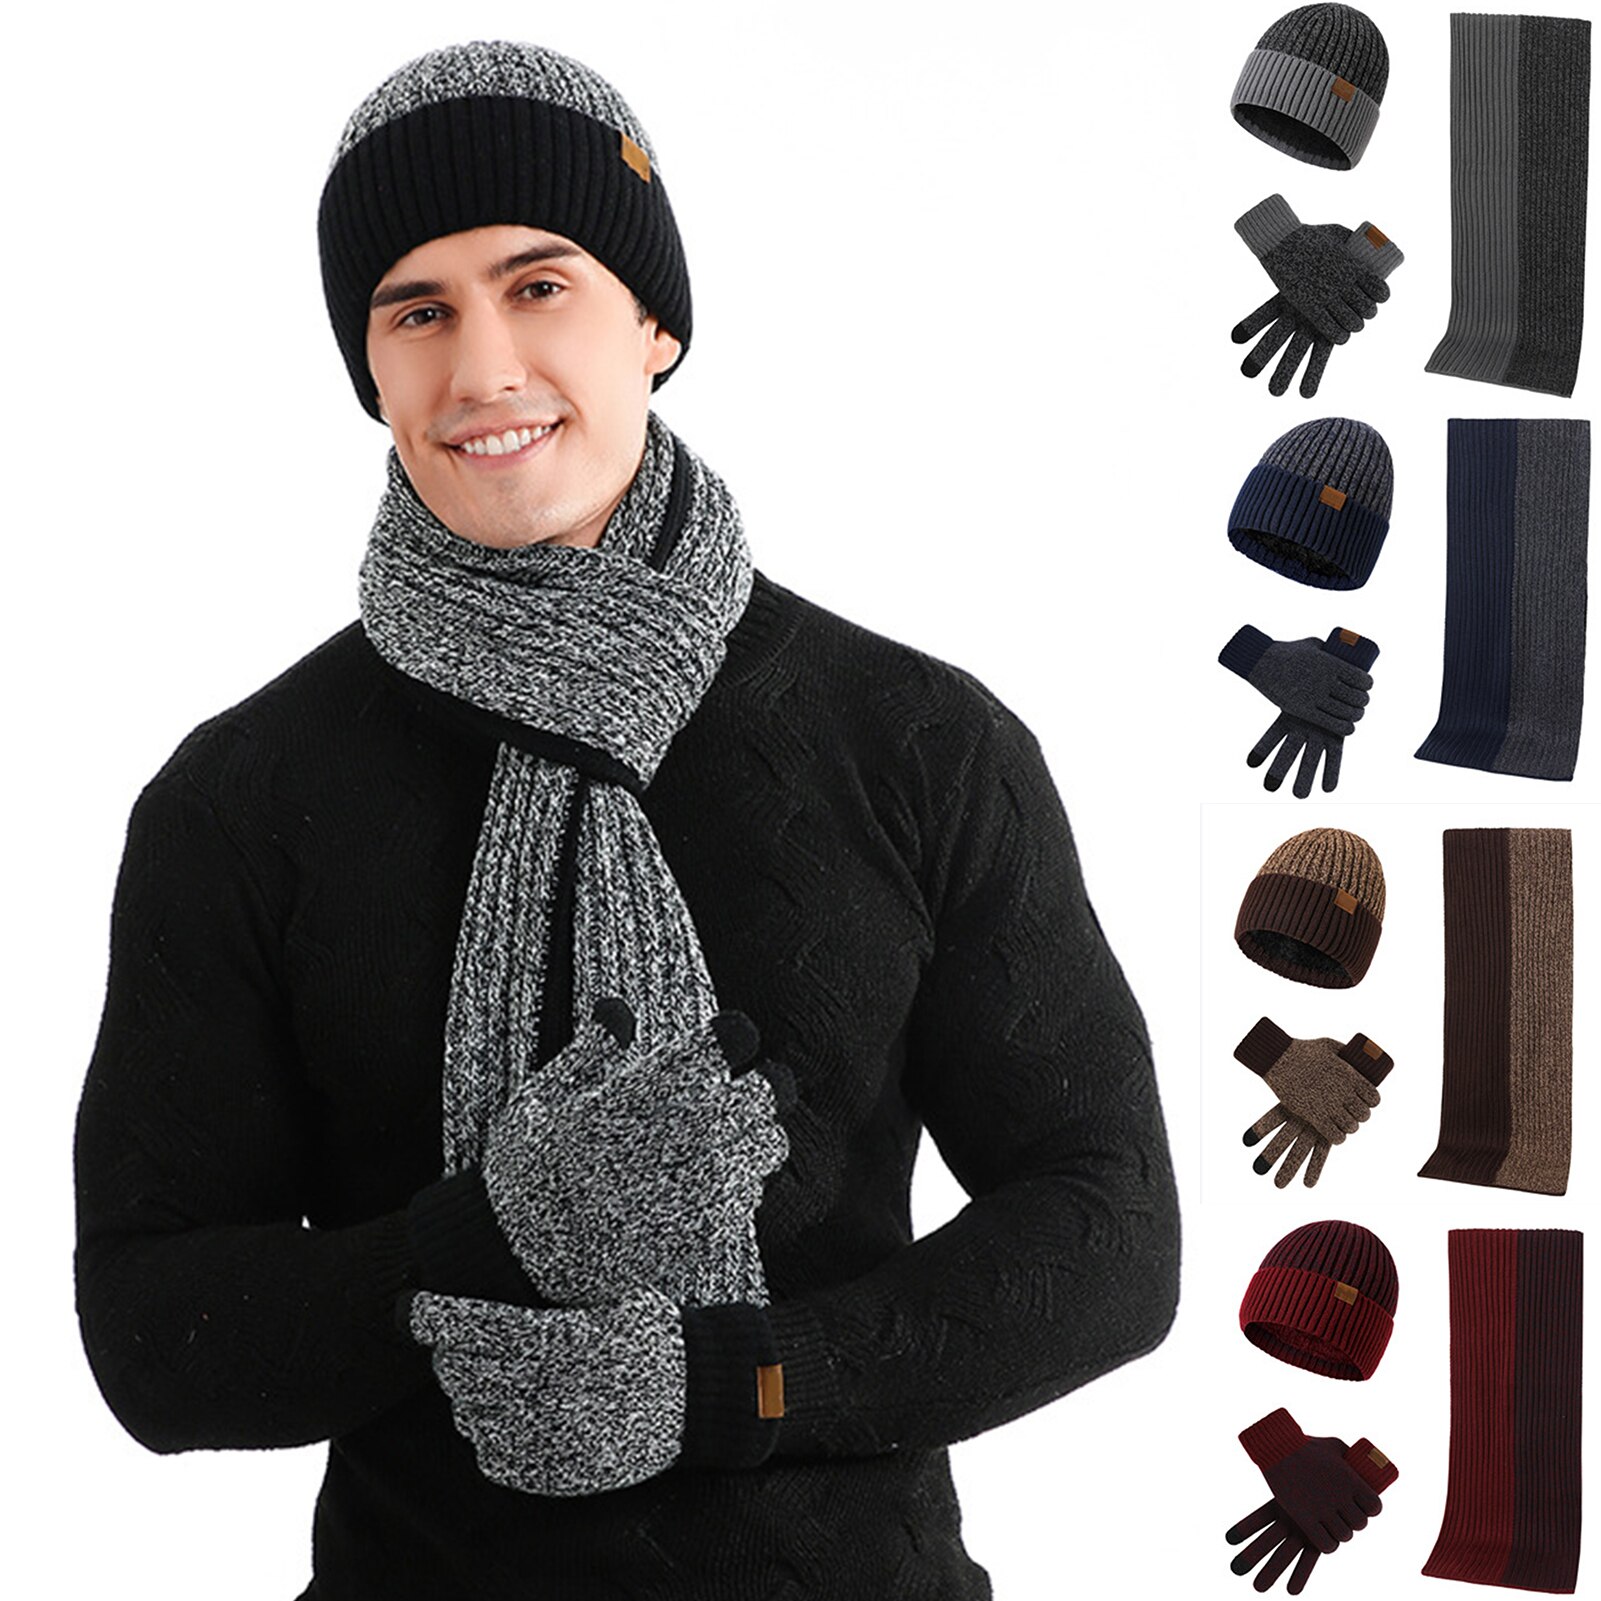 Winter Beanie Hat Scarf Set Male Casual Scarf Warm Knitted Hat For Women Outdoor Winter Warm Set Anti-cold Weather Set Female